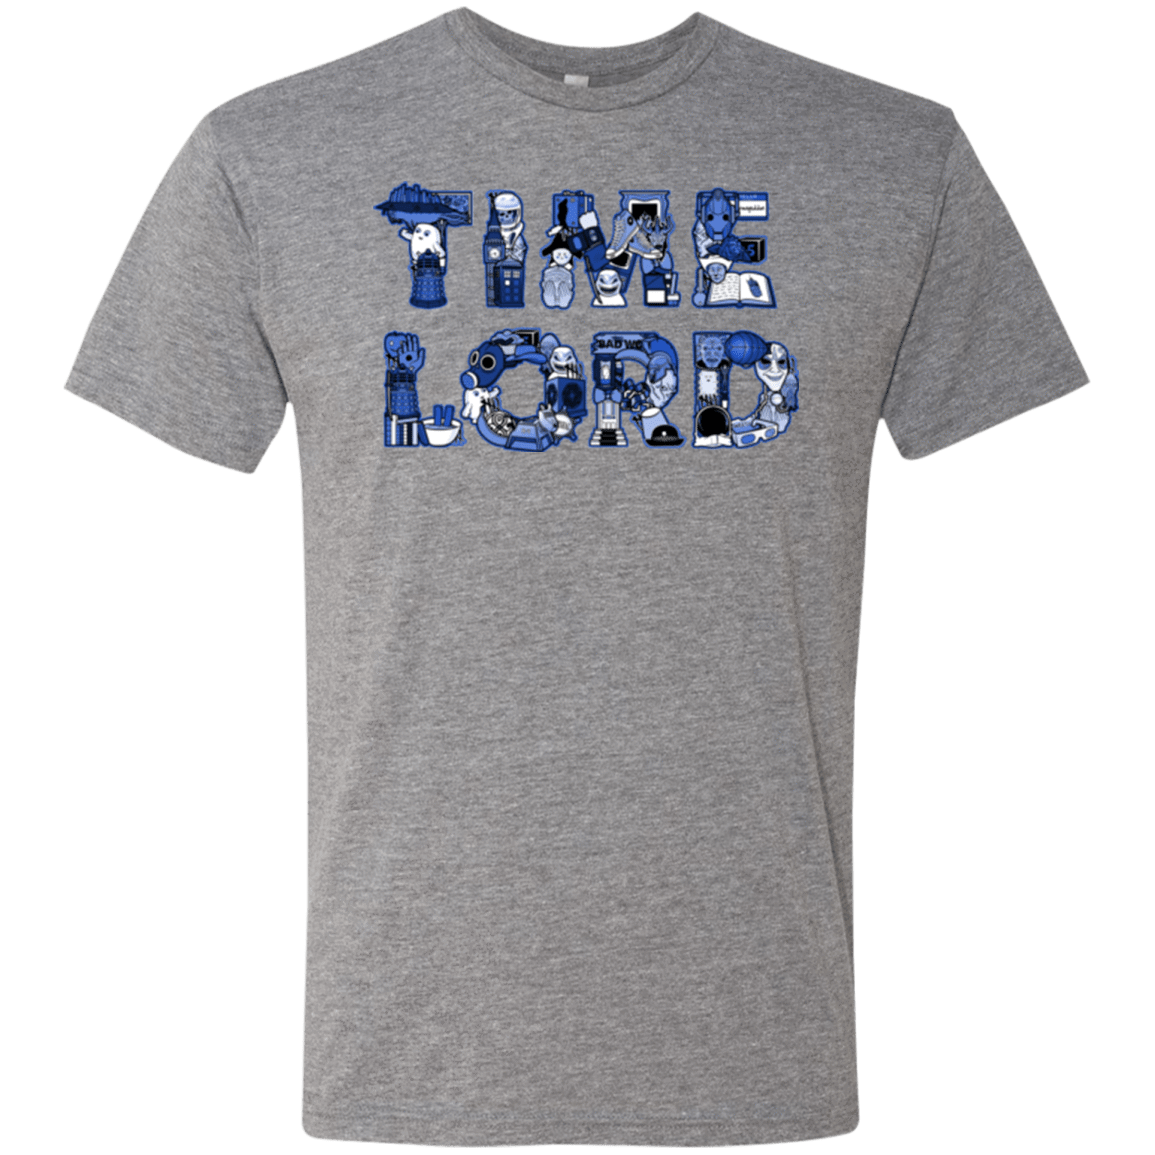 T-Shirts Premium Heather / Small Timelord Men's Triblend T-Shirt